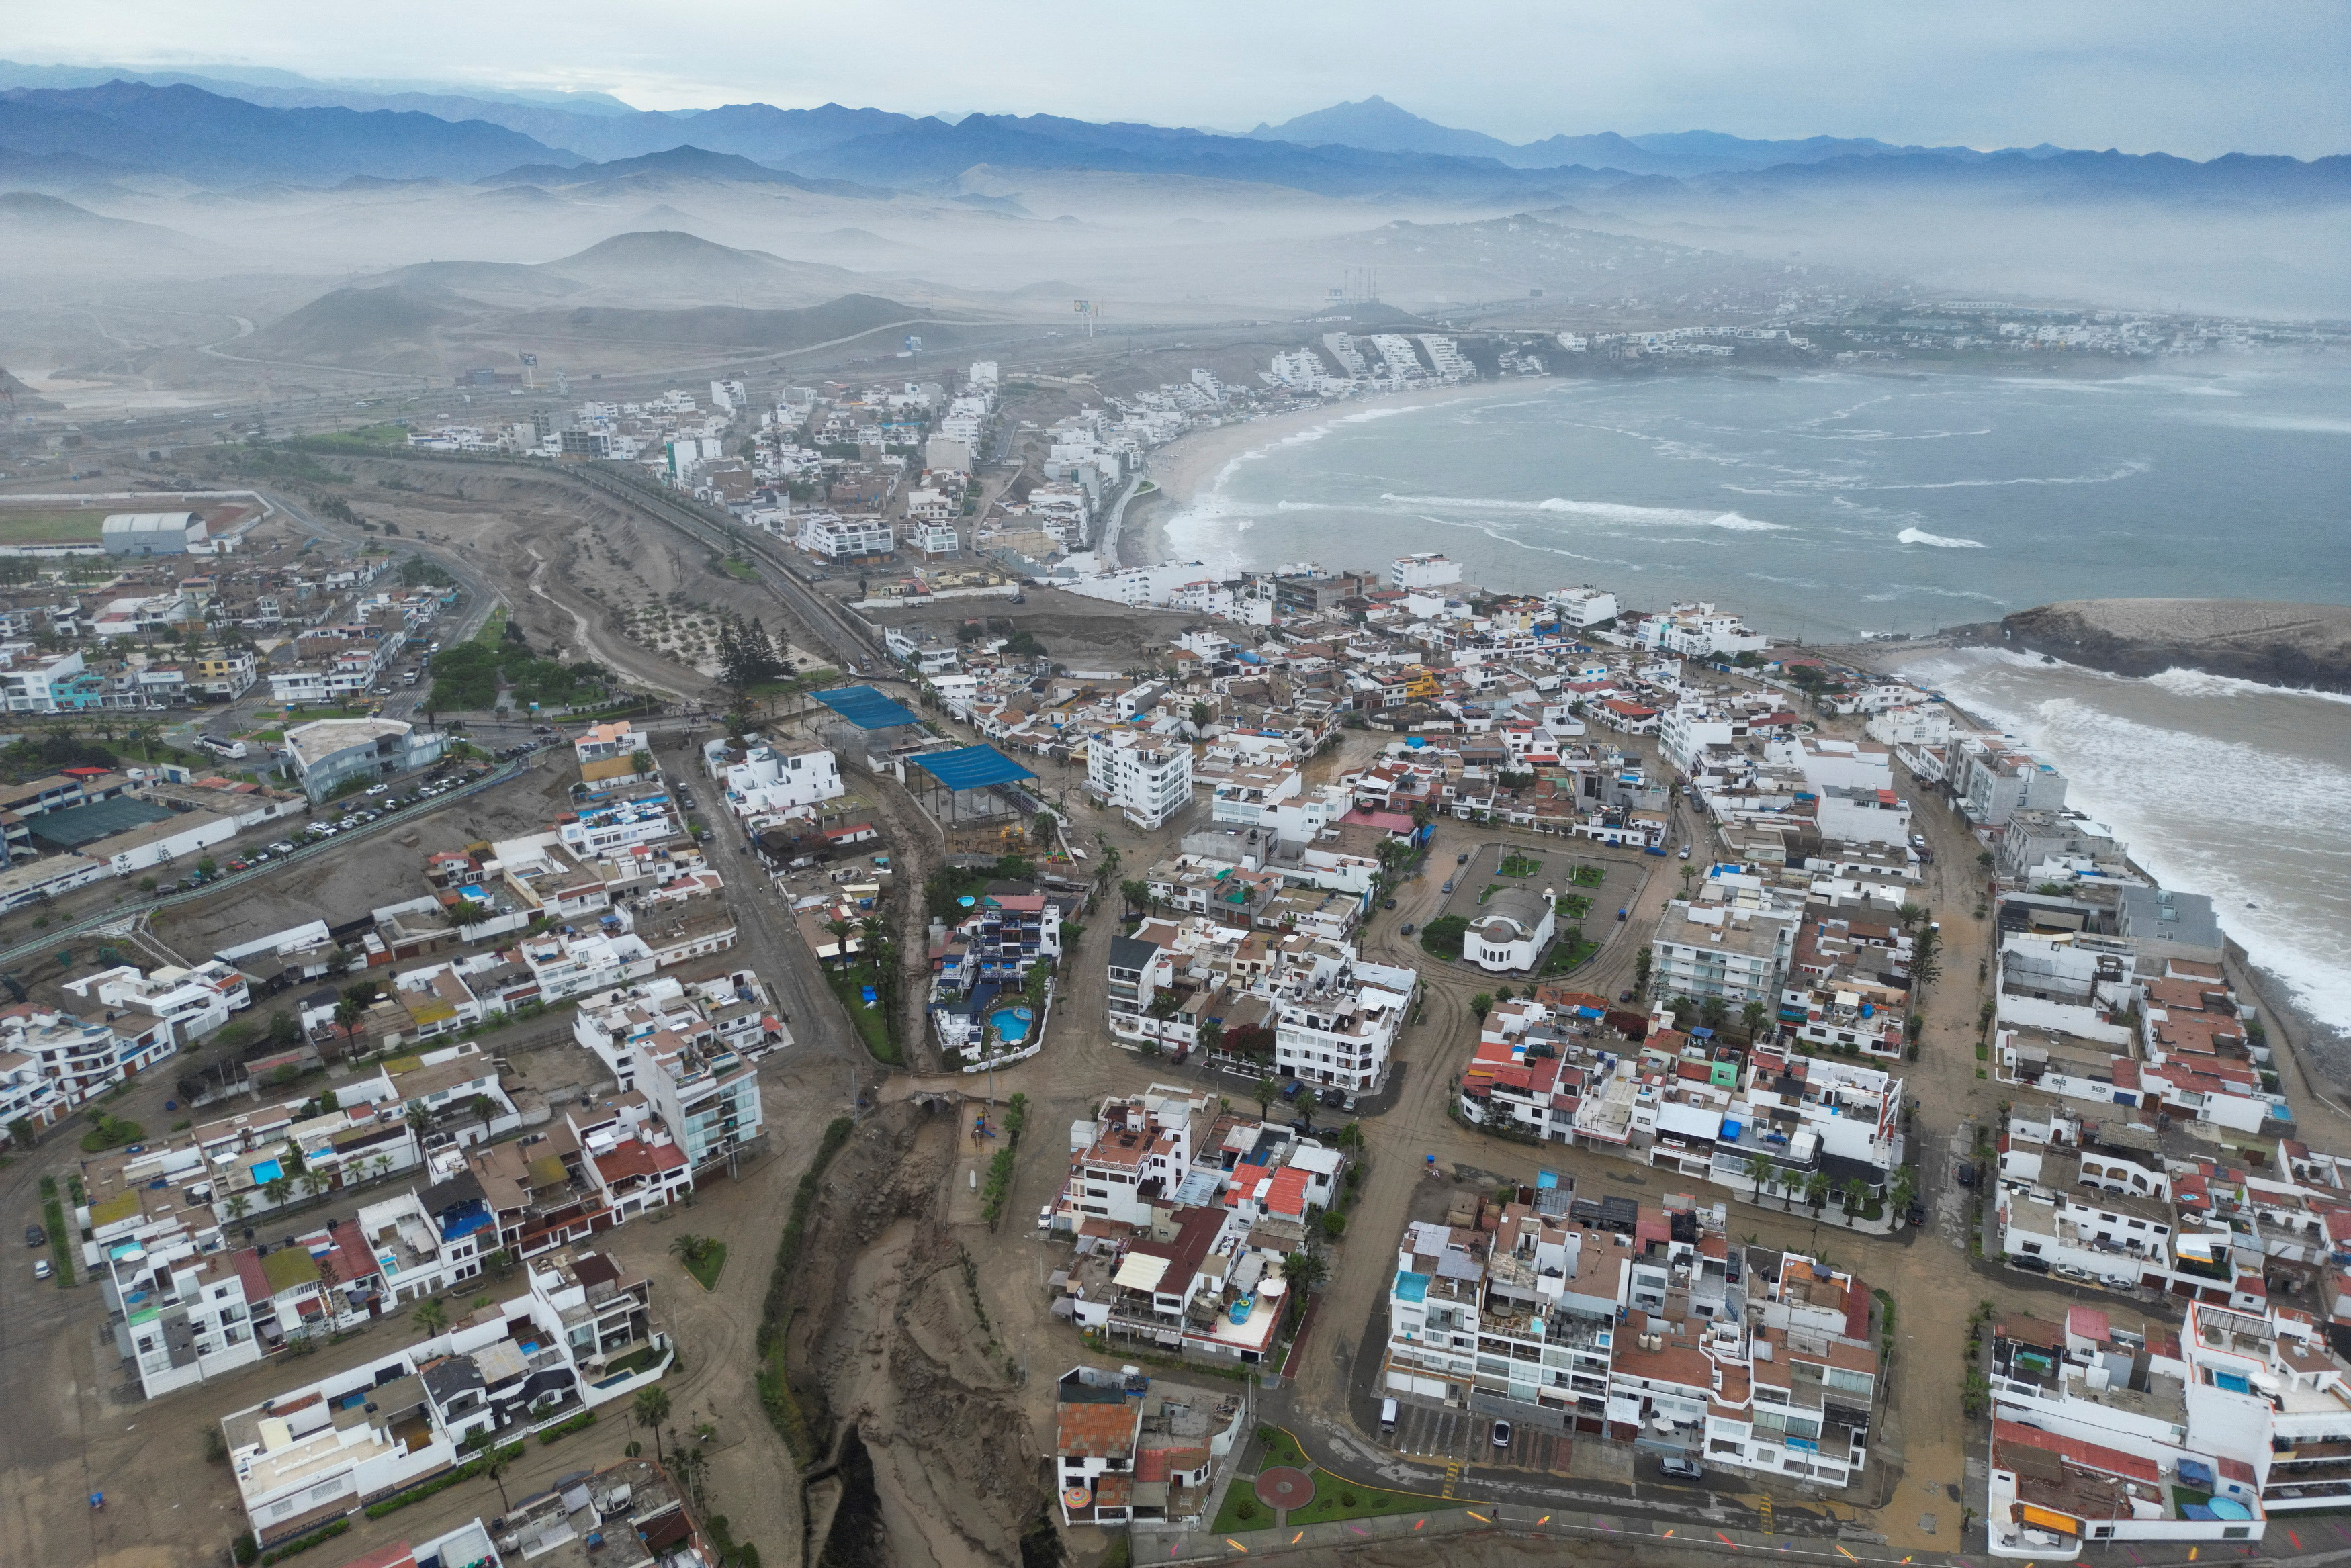 A landslide caused by Cyclone Yaku covers the streets of the Punta Hermosa resort, on the outskirts of Lima